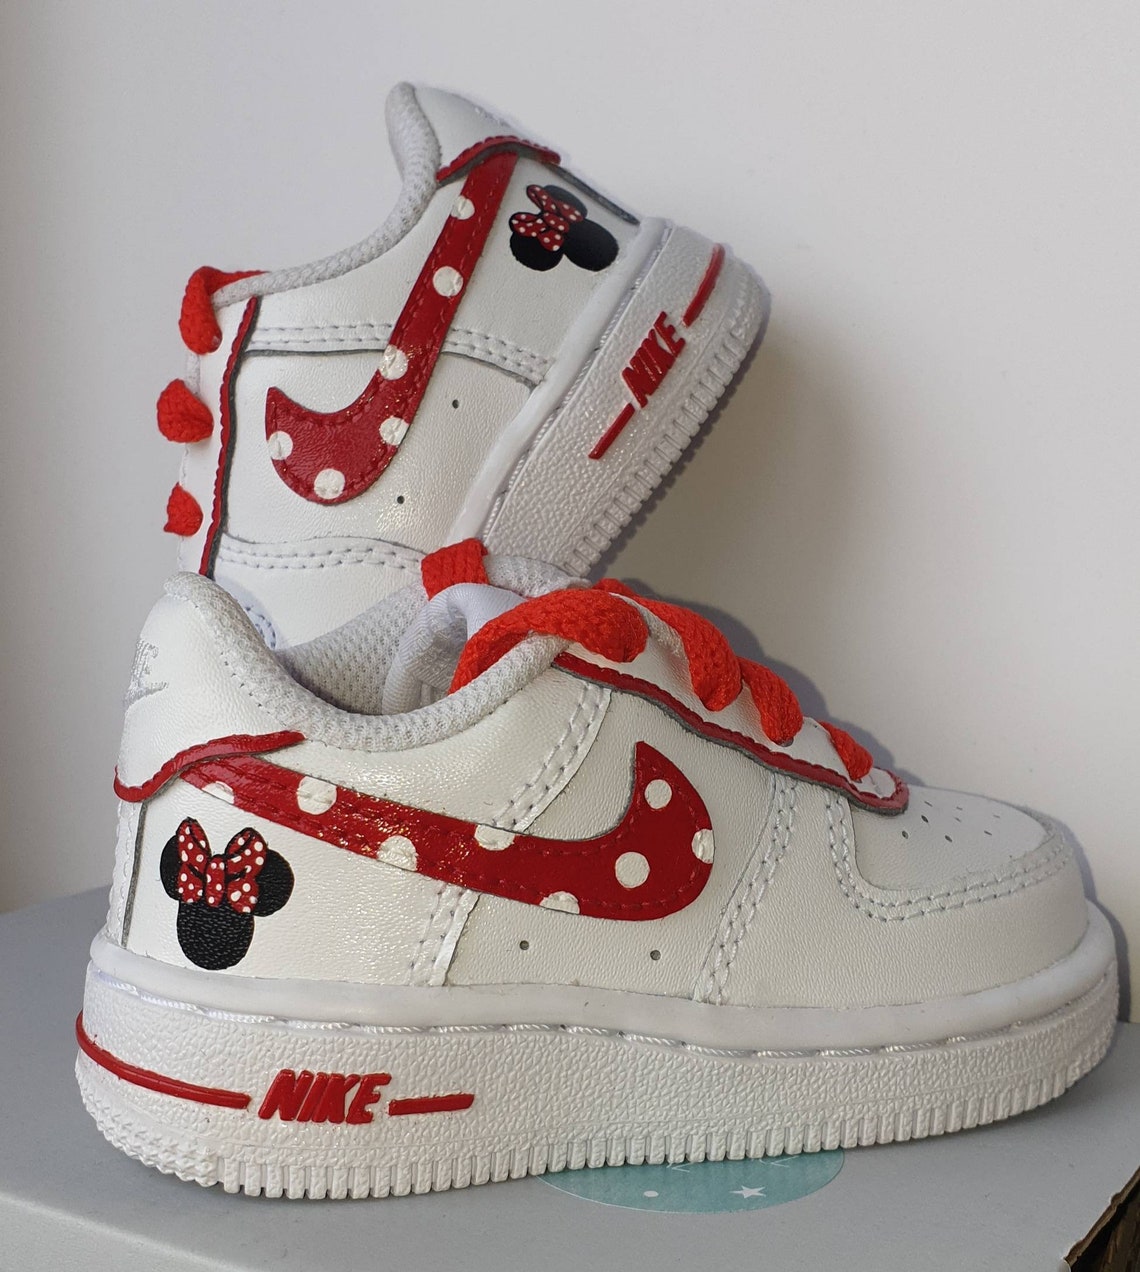 Disney Dot Mickey Minnie Mouse Air Force One/1 - Etsy